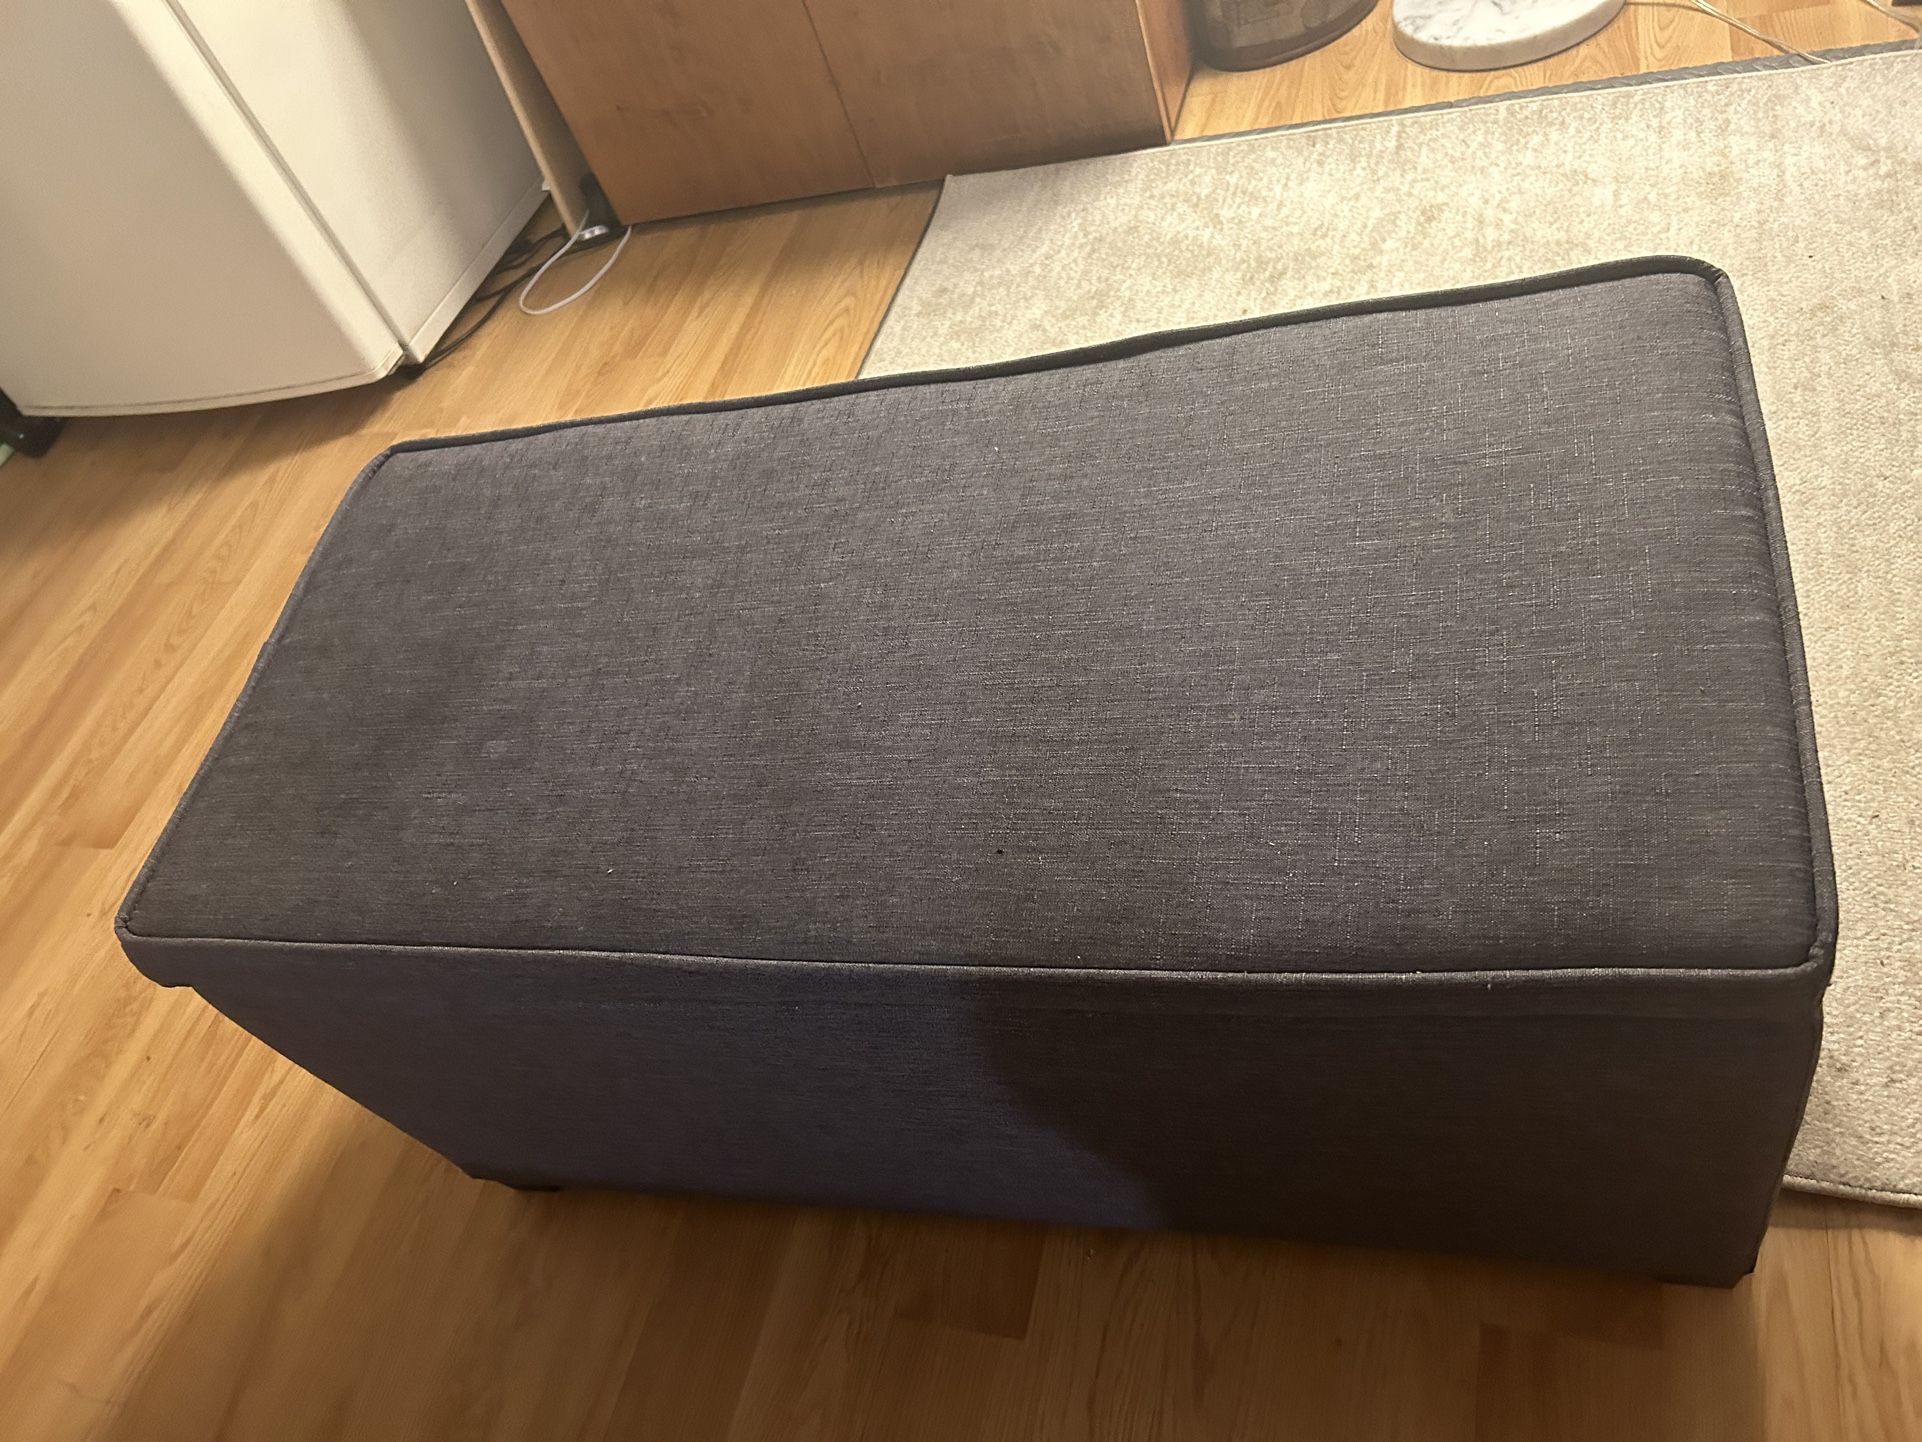 Ottoman $30 Or Beat Offer 